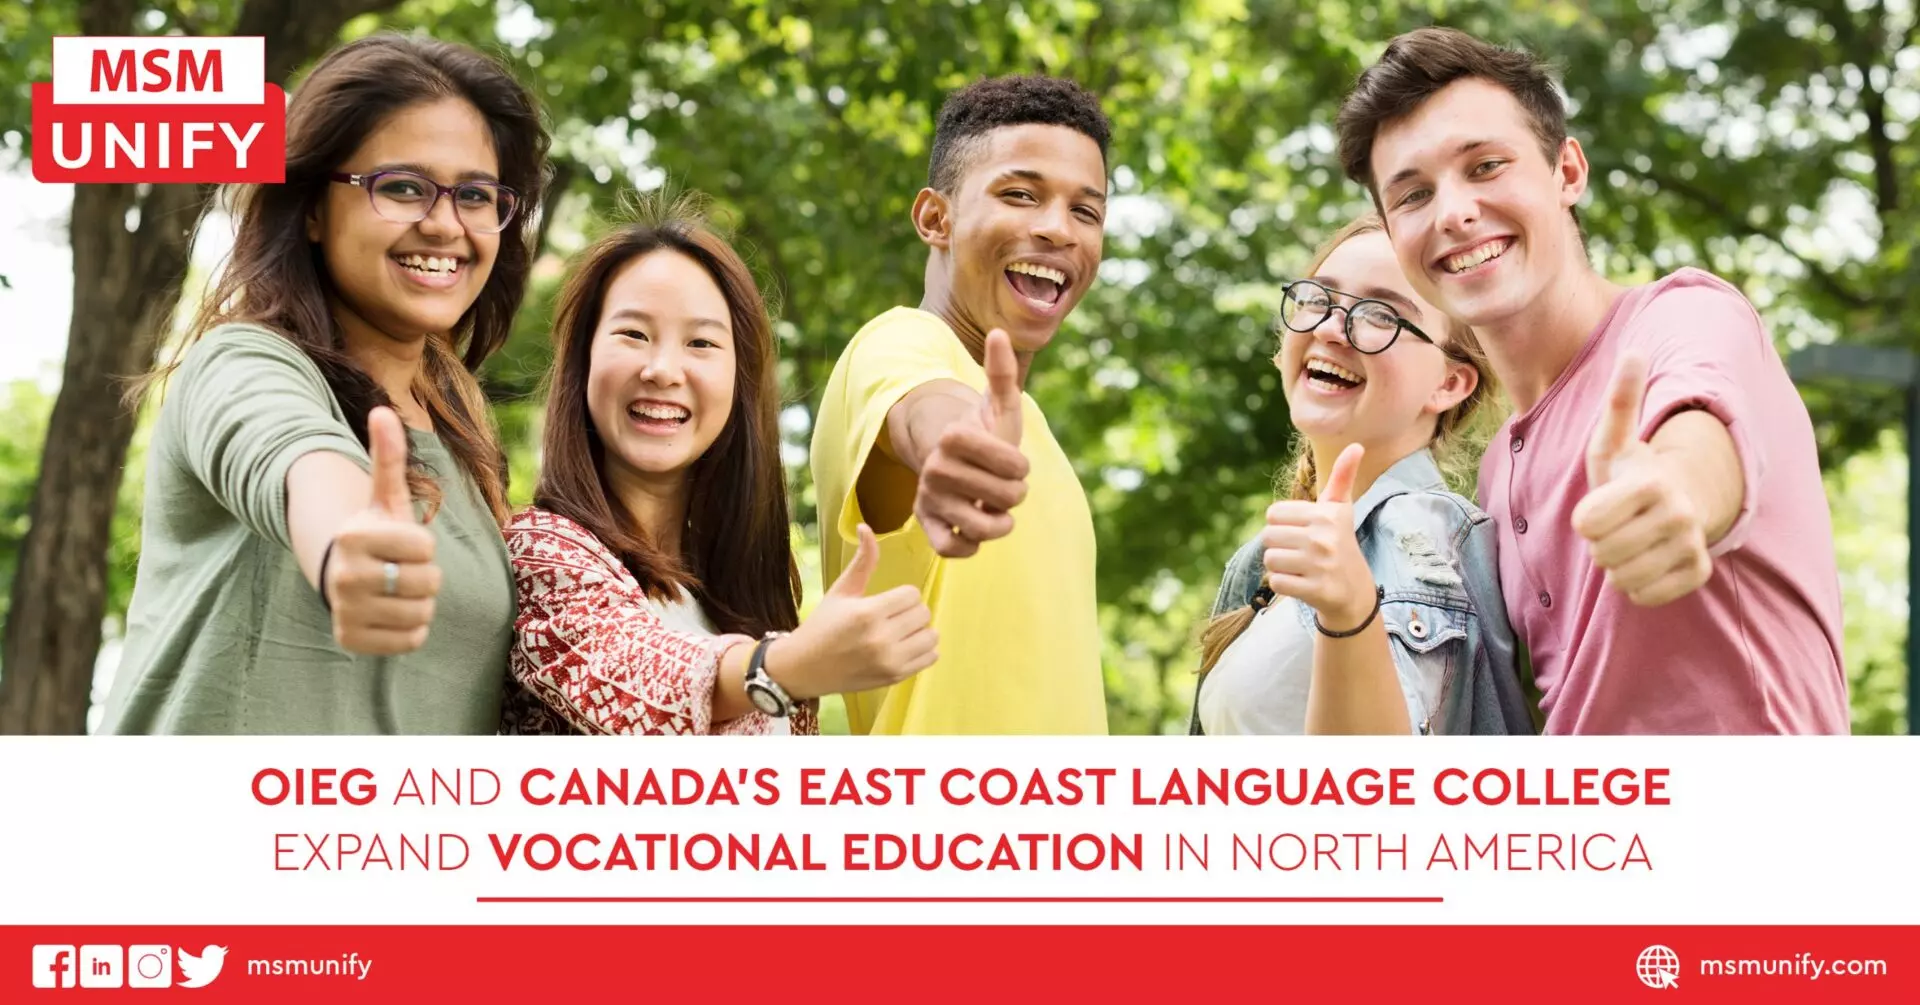 OIEG and Canadas East Coast Language College Expand Vocational Education in North America scaled 1